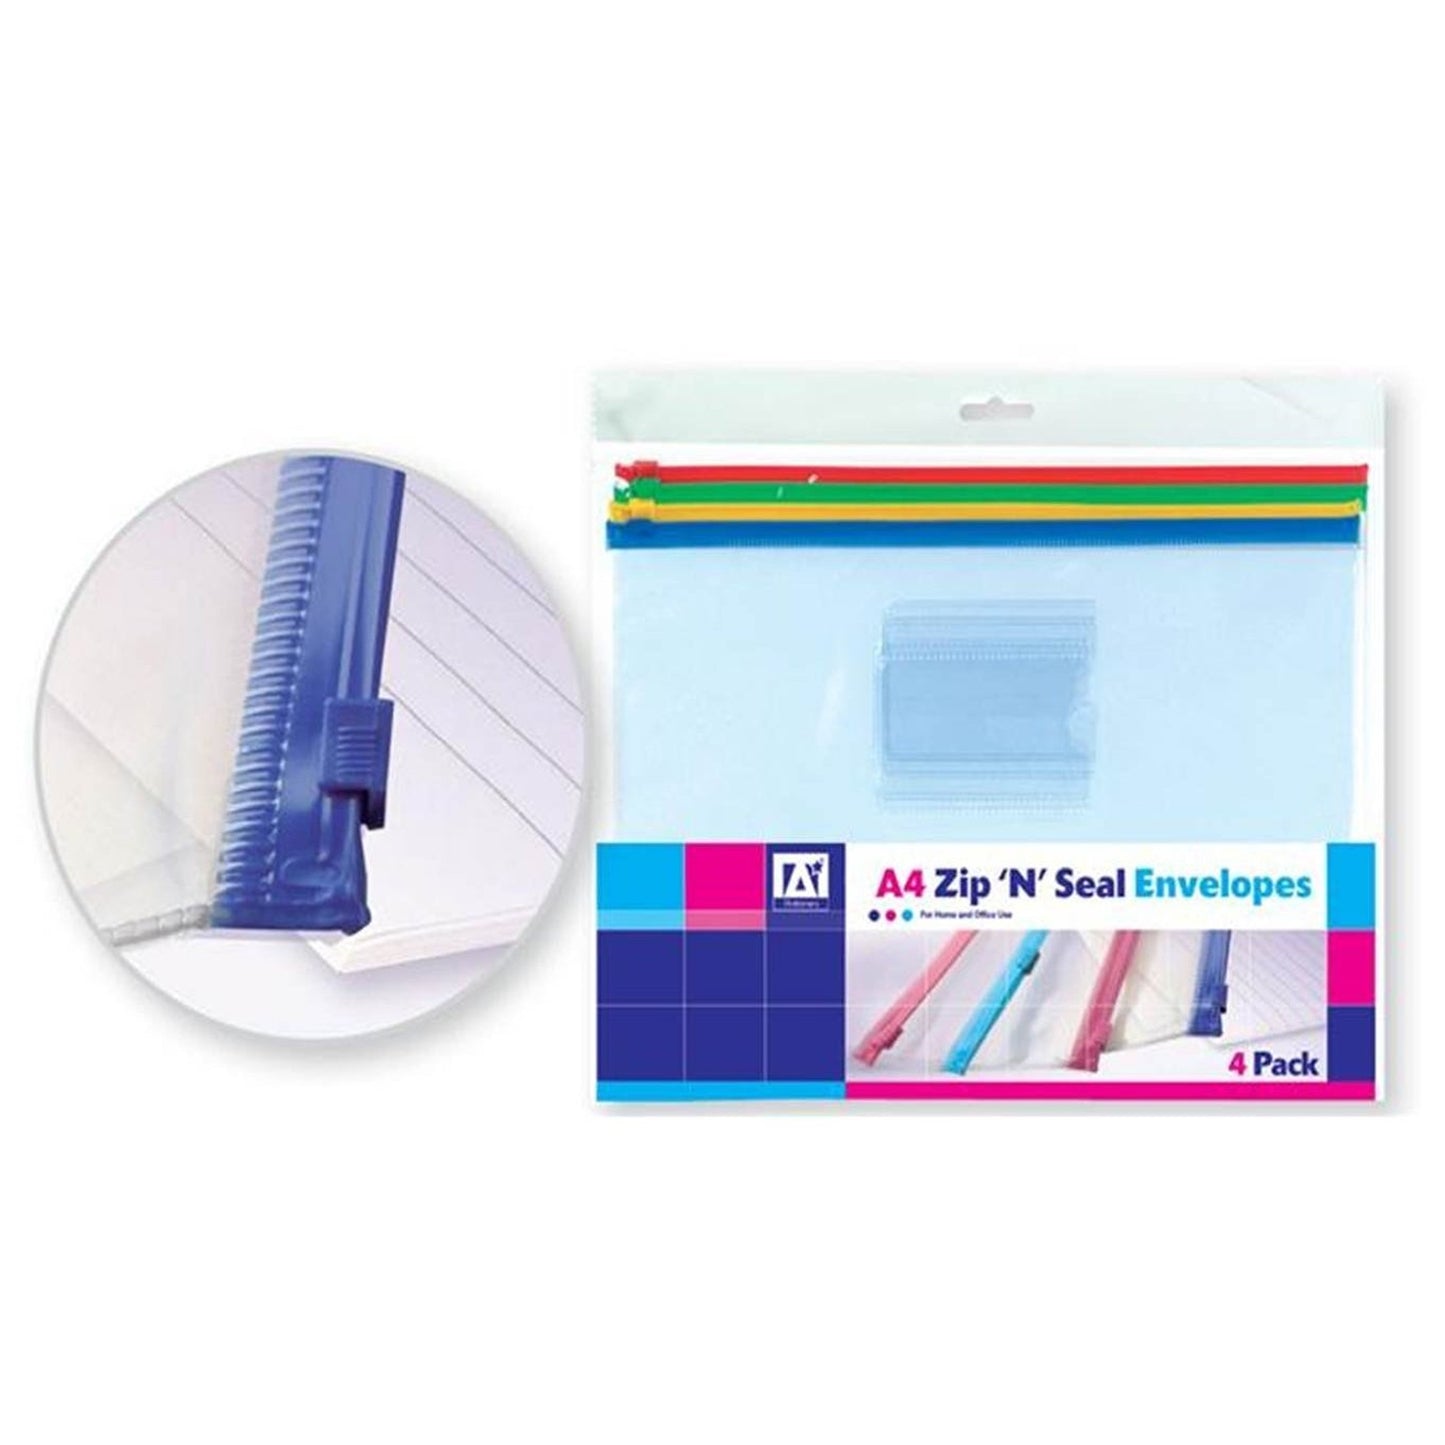 A4 Zip and Seal Plastic Envelopes Pack of 4